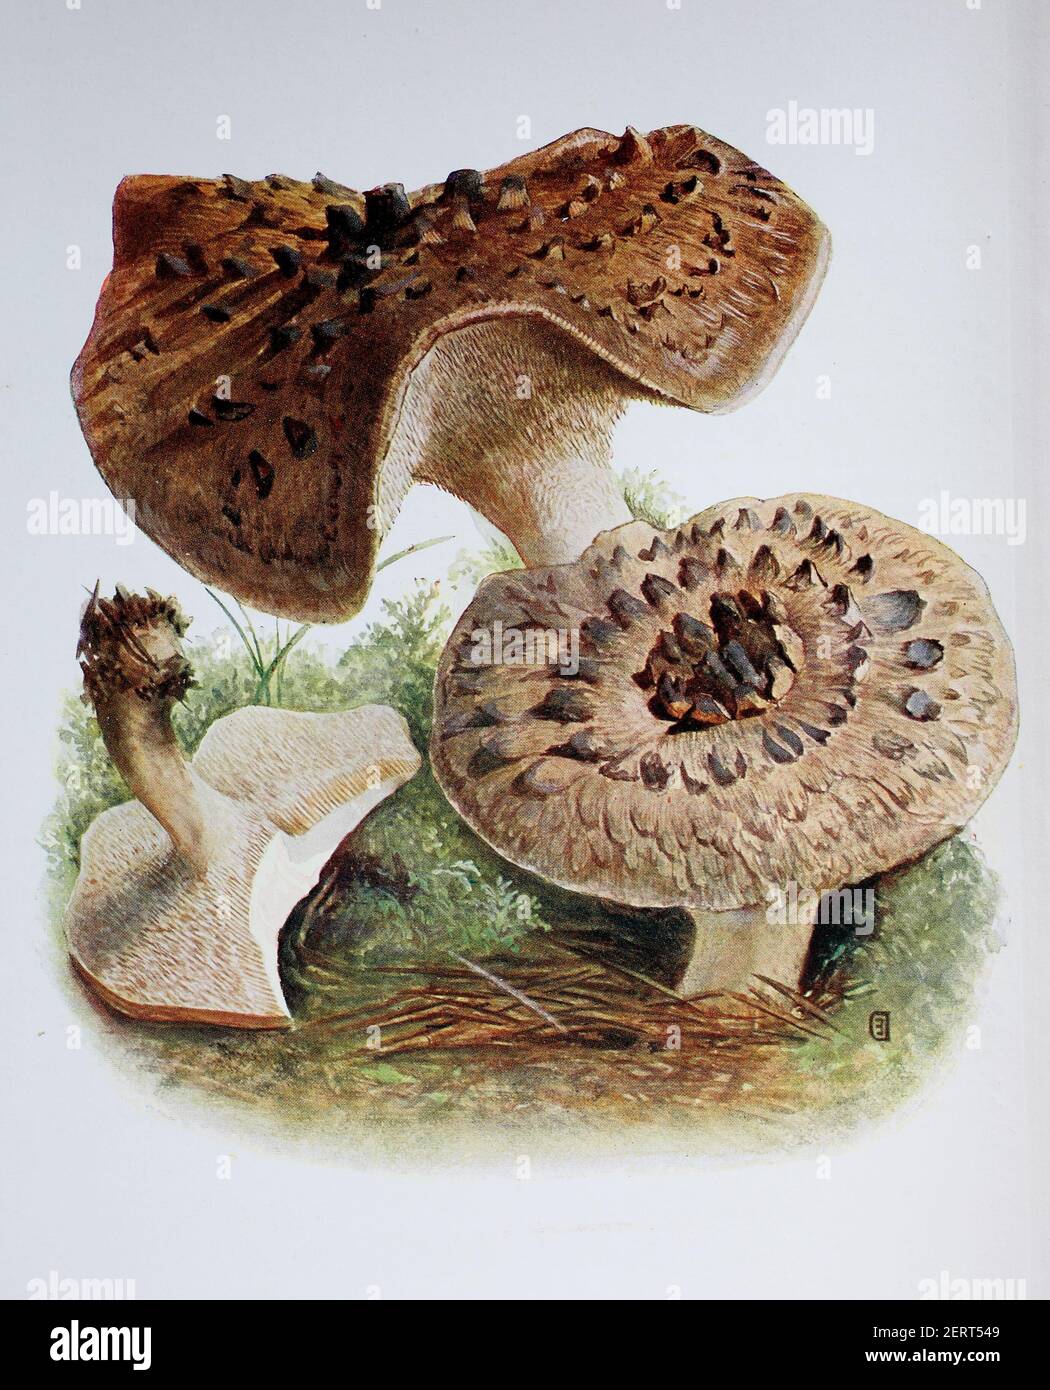 Sarcodon imbricatus, commonly known as the shingled hedgehog or scaly hedgehog, is a species of tooth fungus in the order Thelephorales, digital reproduction of an ilustration of Emil Doerstling (1859-1940) Stock Photo